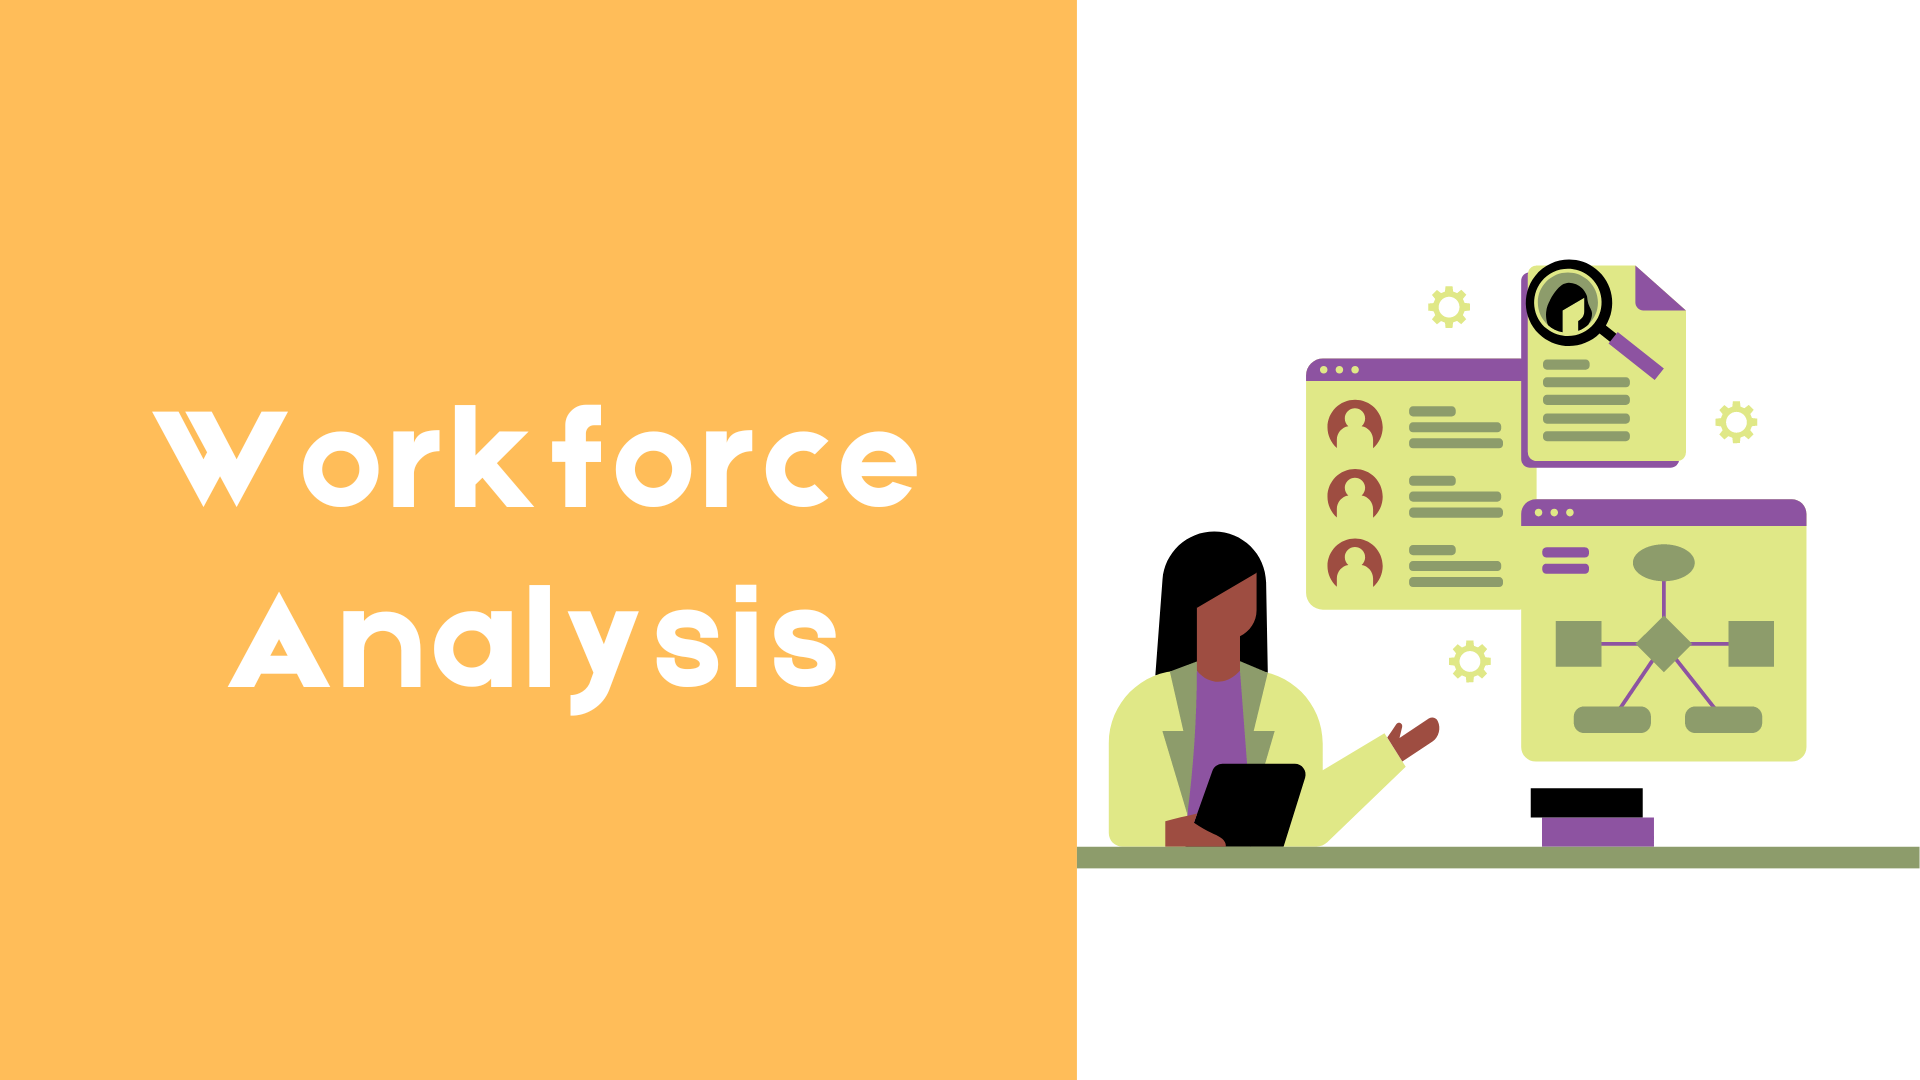 6 Steps to Conduct Workforce Analysis